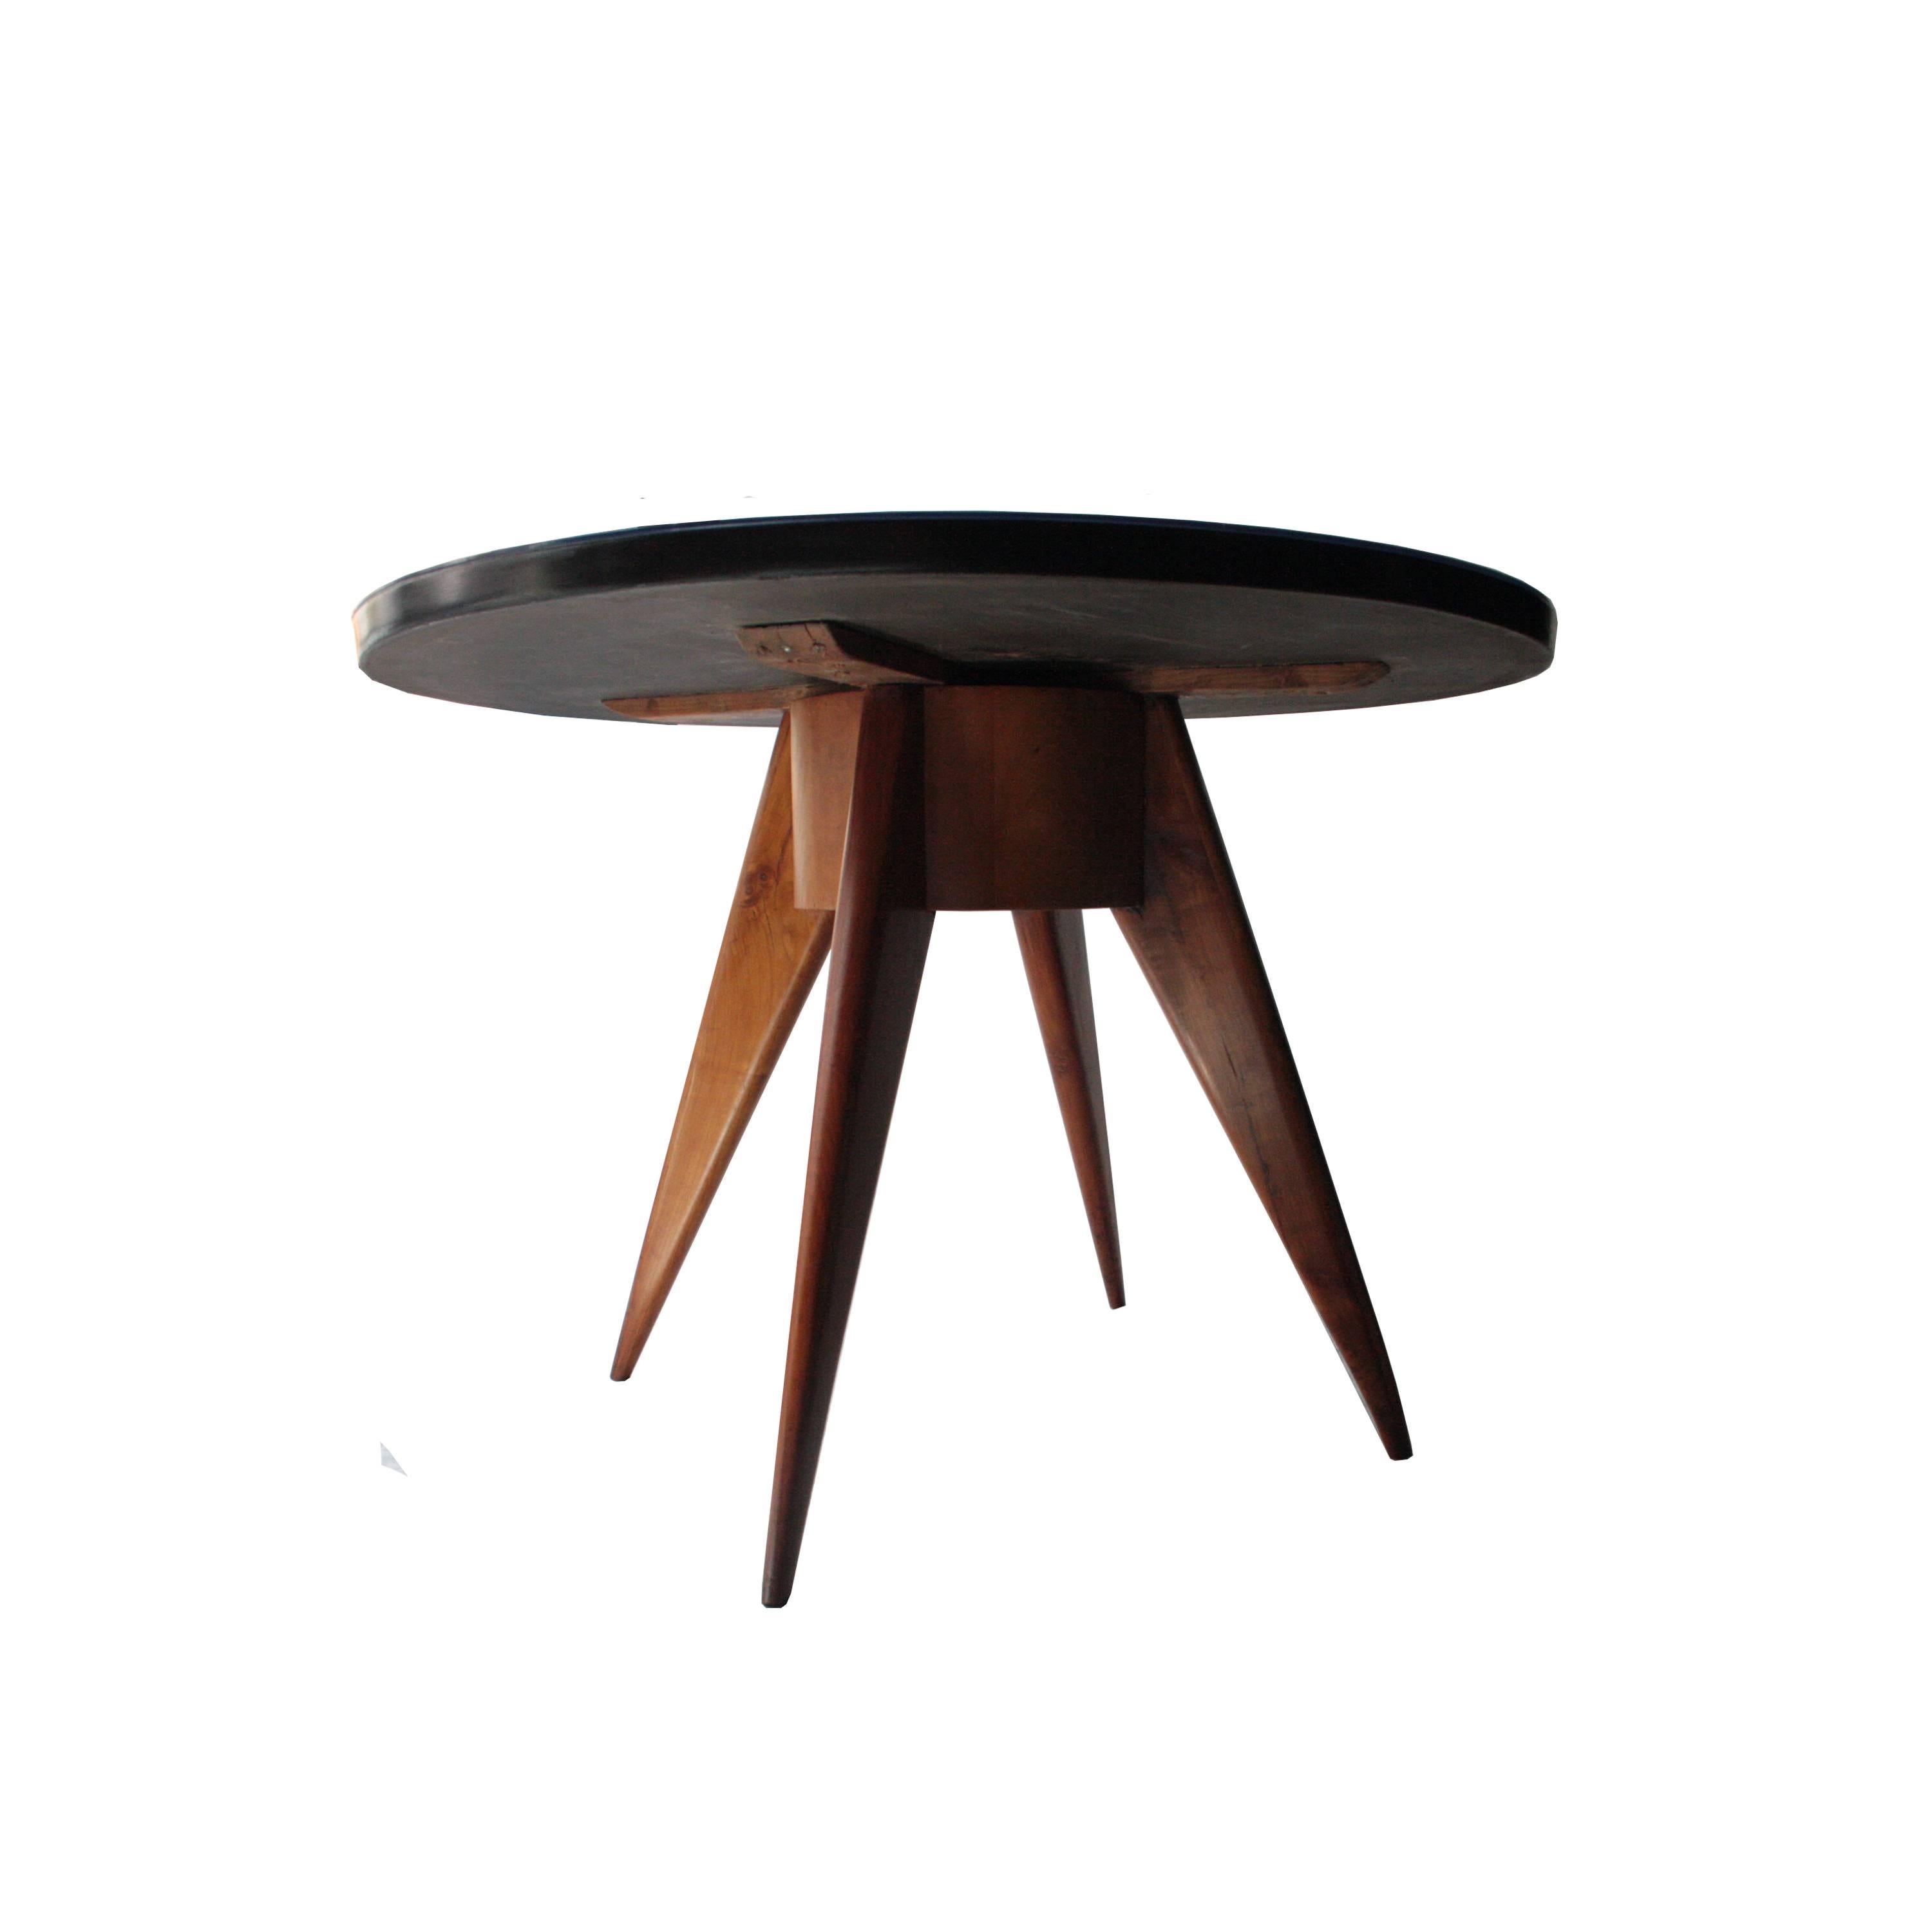 Italian Round Dining Table with Ashwood Structure, Blue Glass Top Klein, Italy, 1950